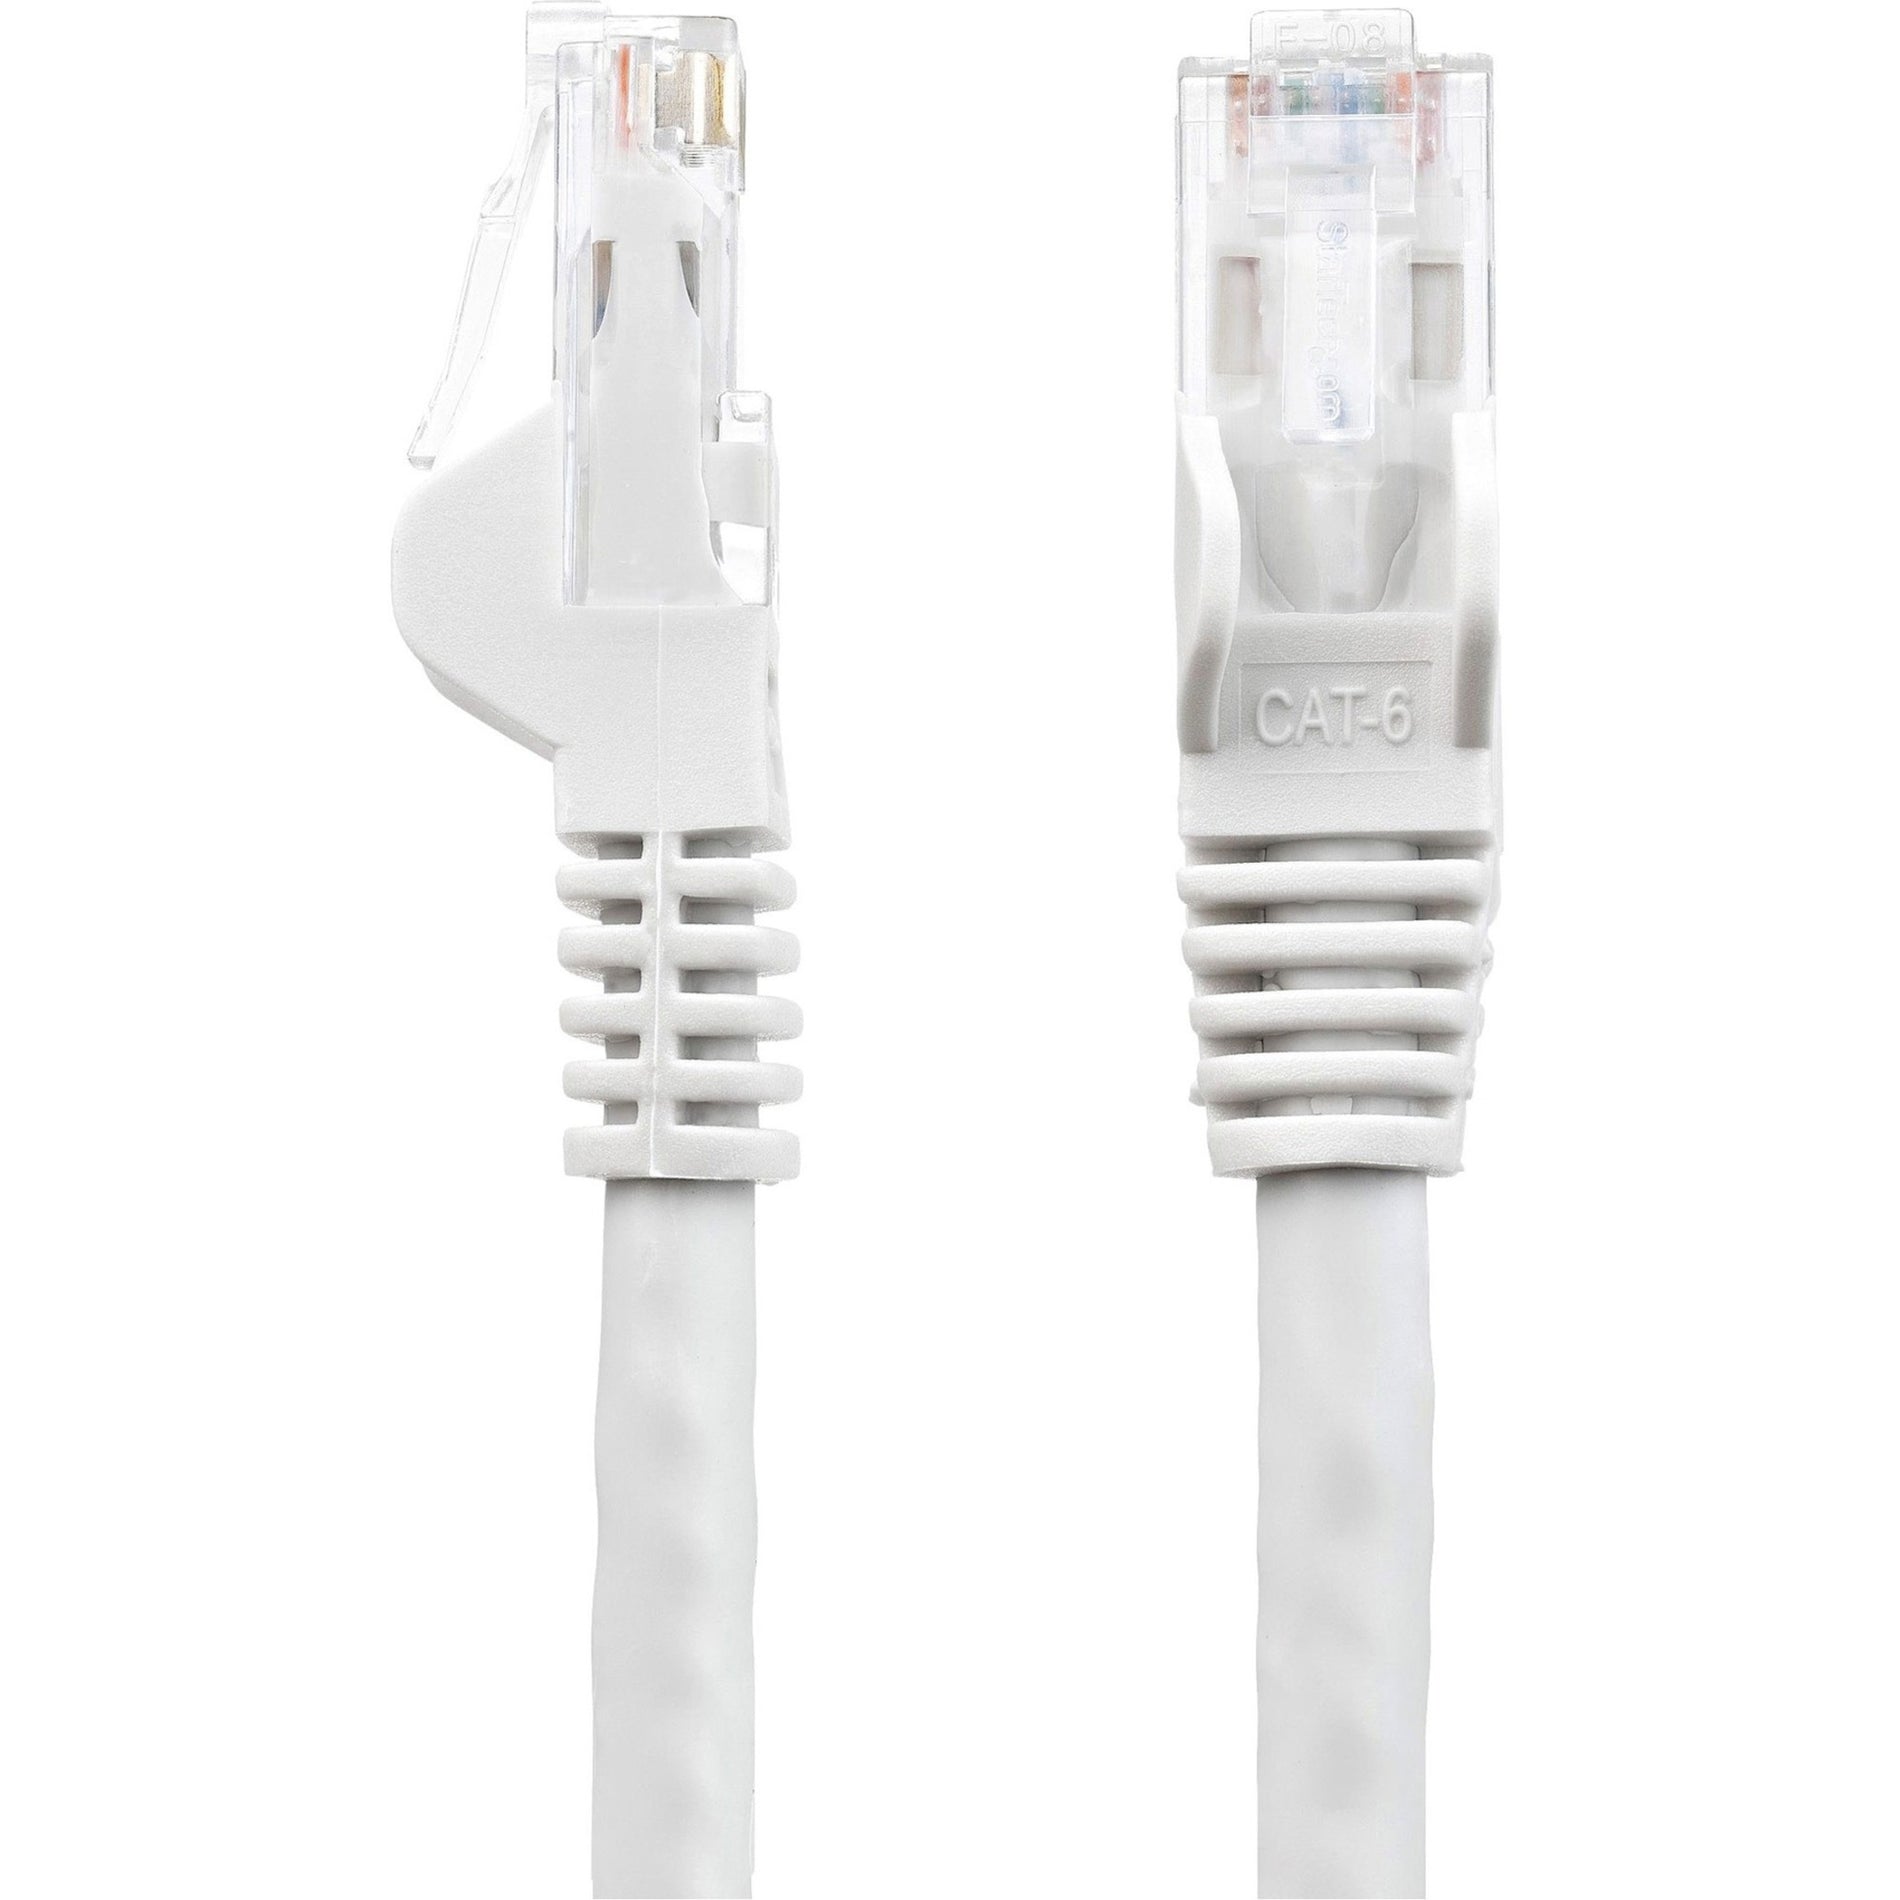 StarTech.com N6PATCH75WH 75 ft White Snagless Cat6 UTP Patch Cable, Lifetime Warranty, Gold Connectors, Easy Cable Routing